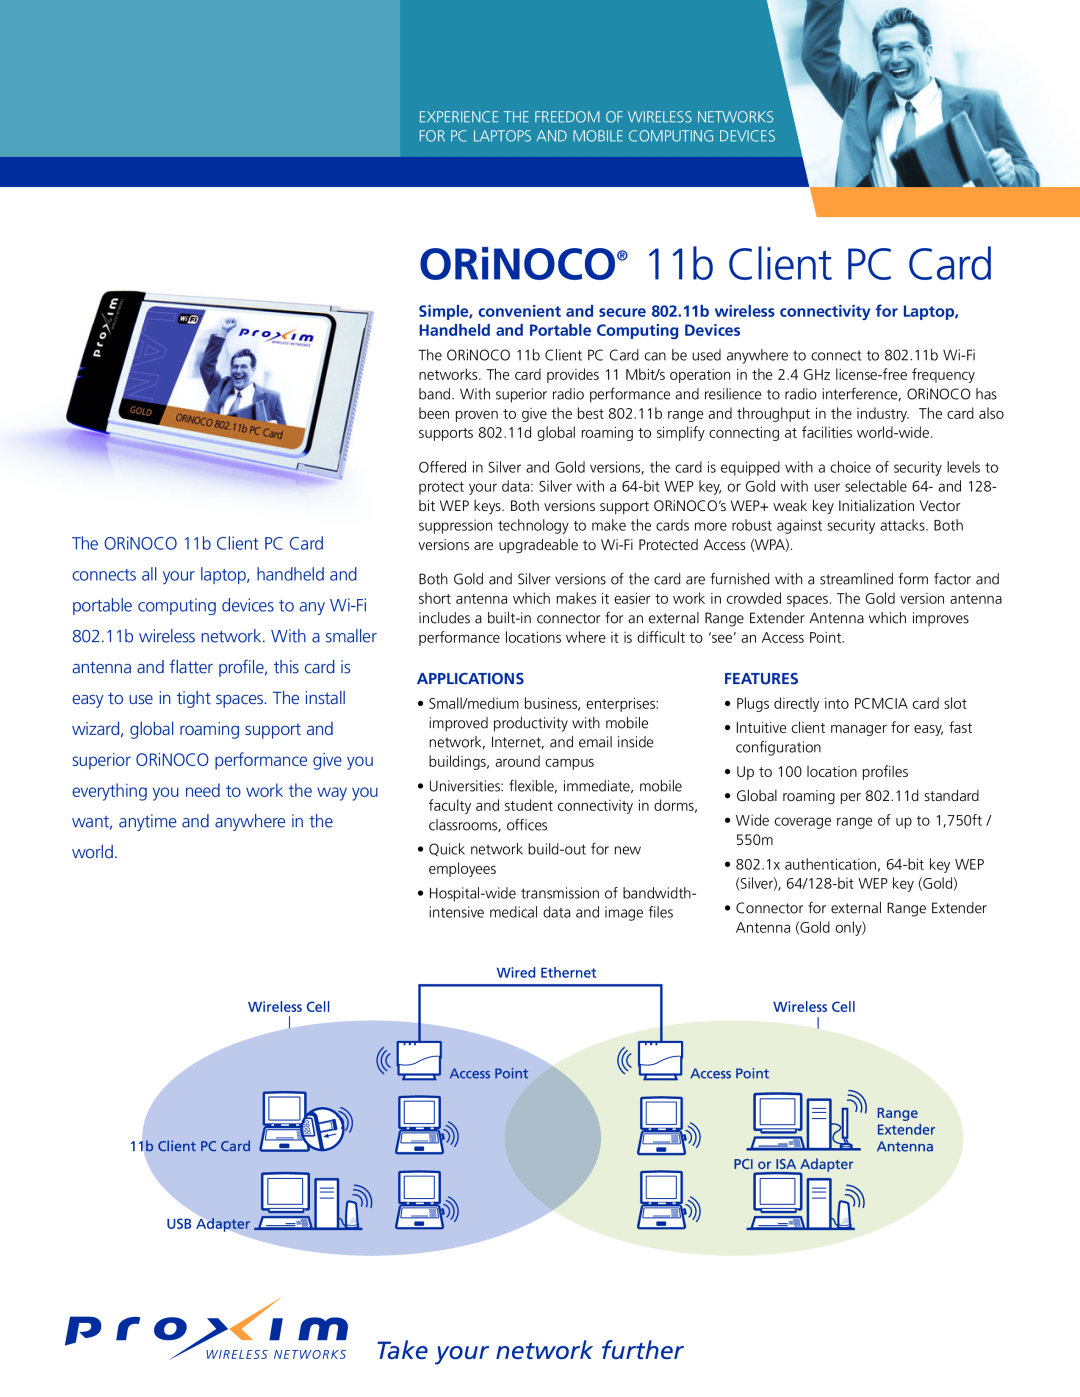 Nintendo 11B manual Applications, Features, ORiNOCO 11b Client PC Card, Take your network further 